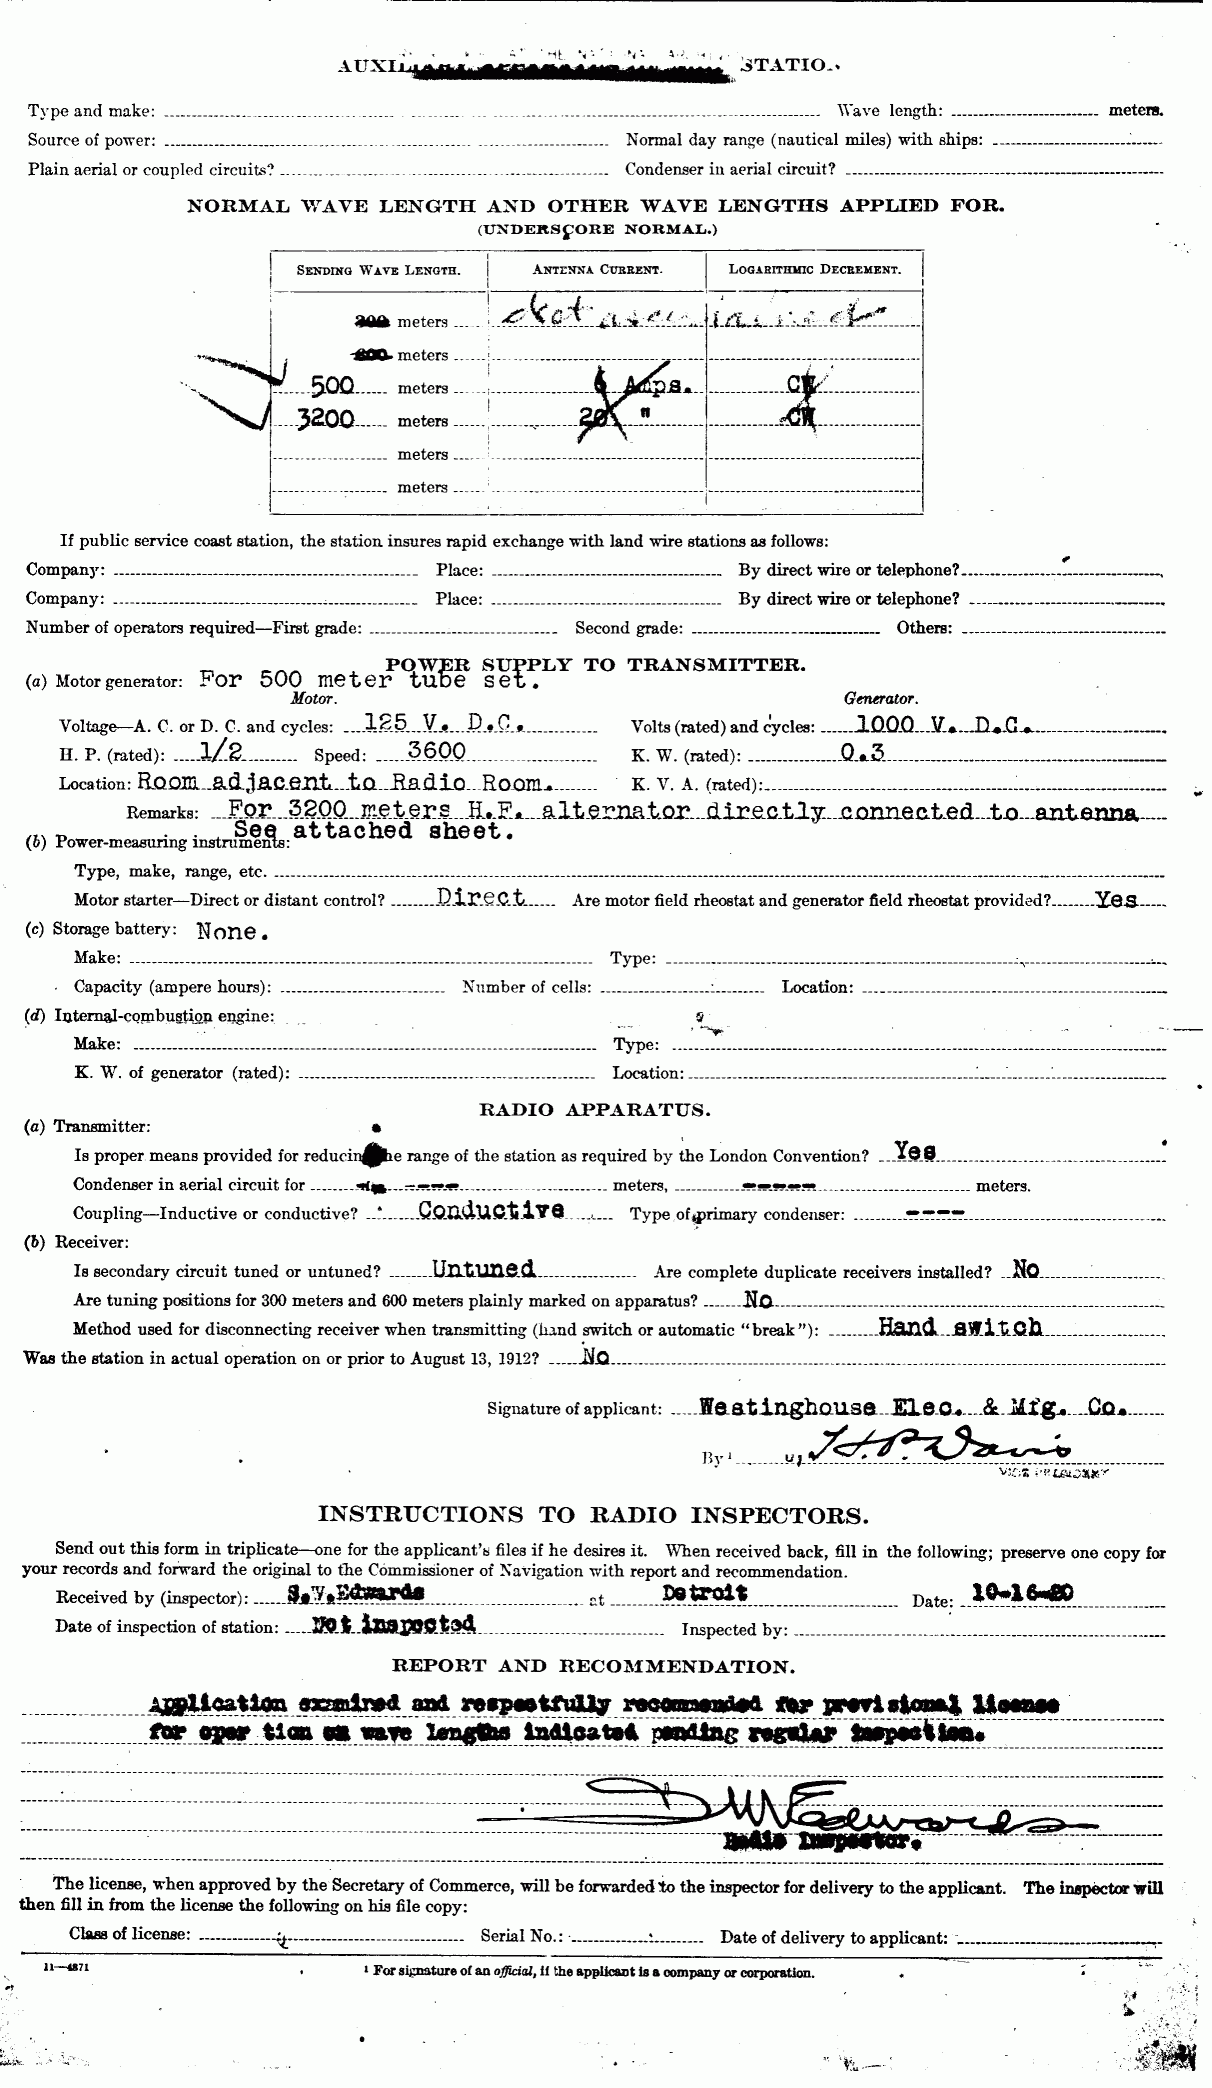 Form 761 for KDKA first licence - 2nd page